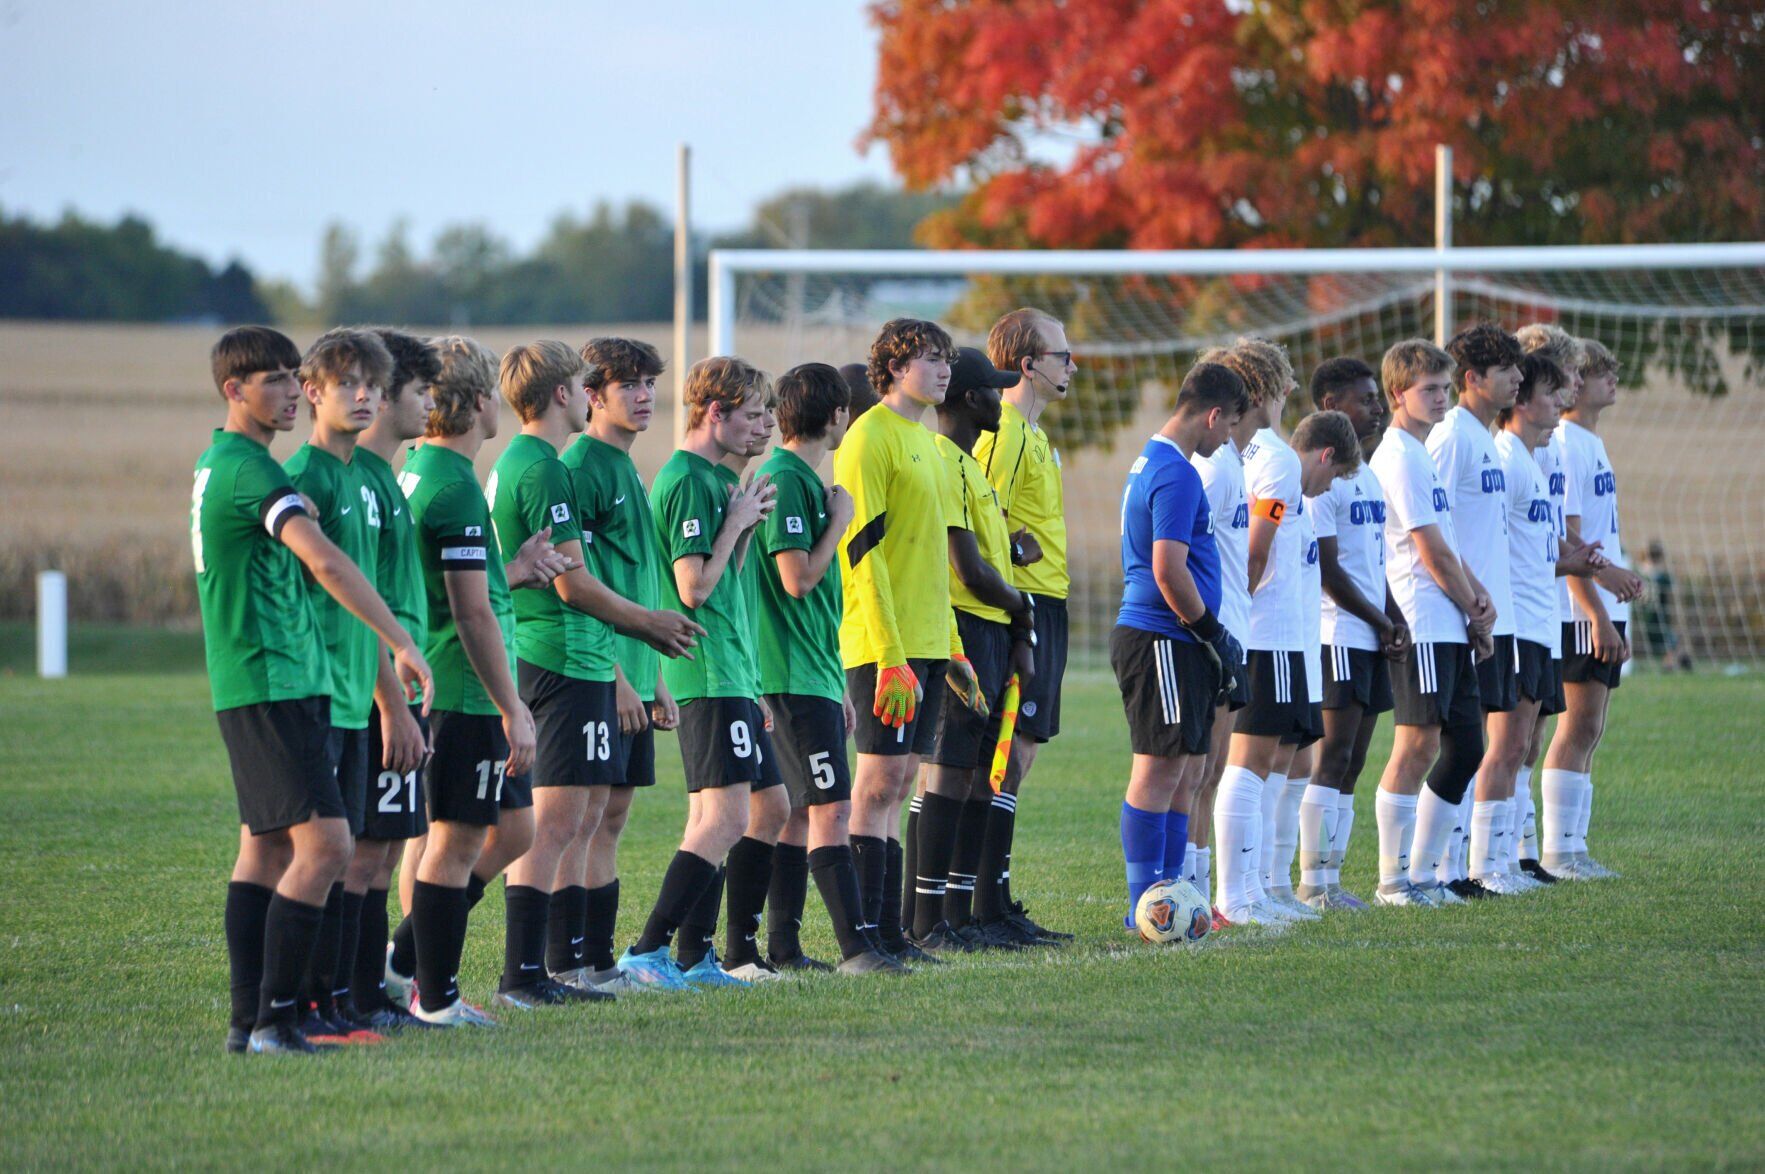 Top Five Boys Soccer Matchups in the Western Big 6 Conference for the Upcoming Season